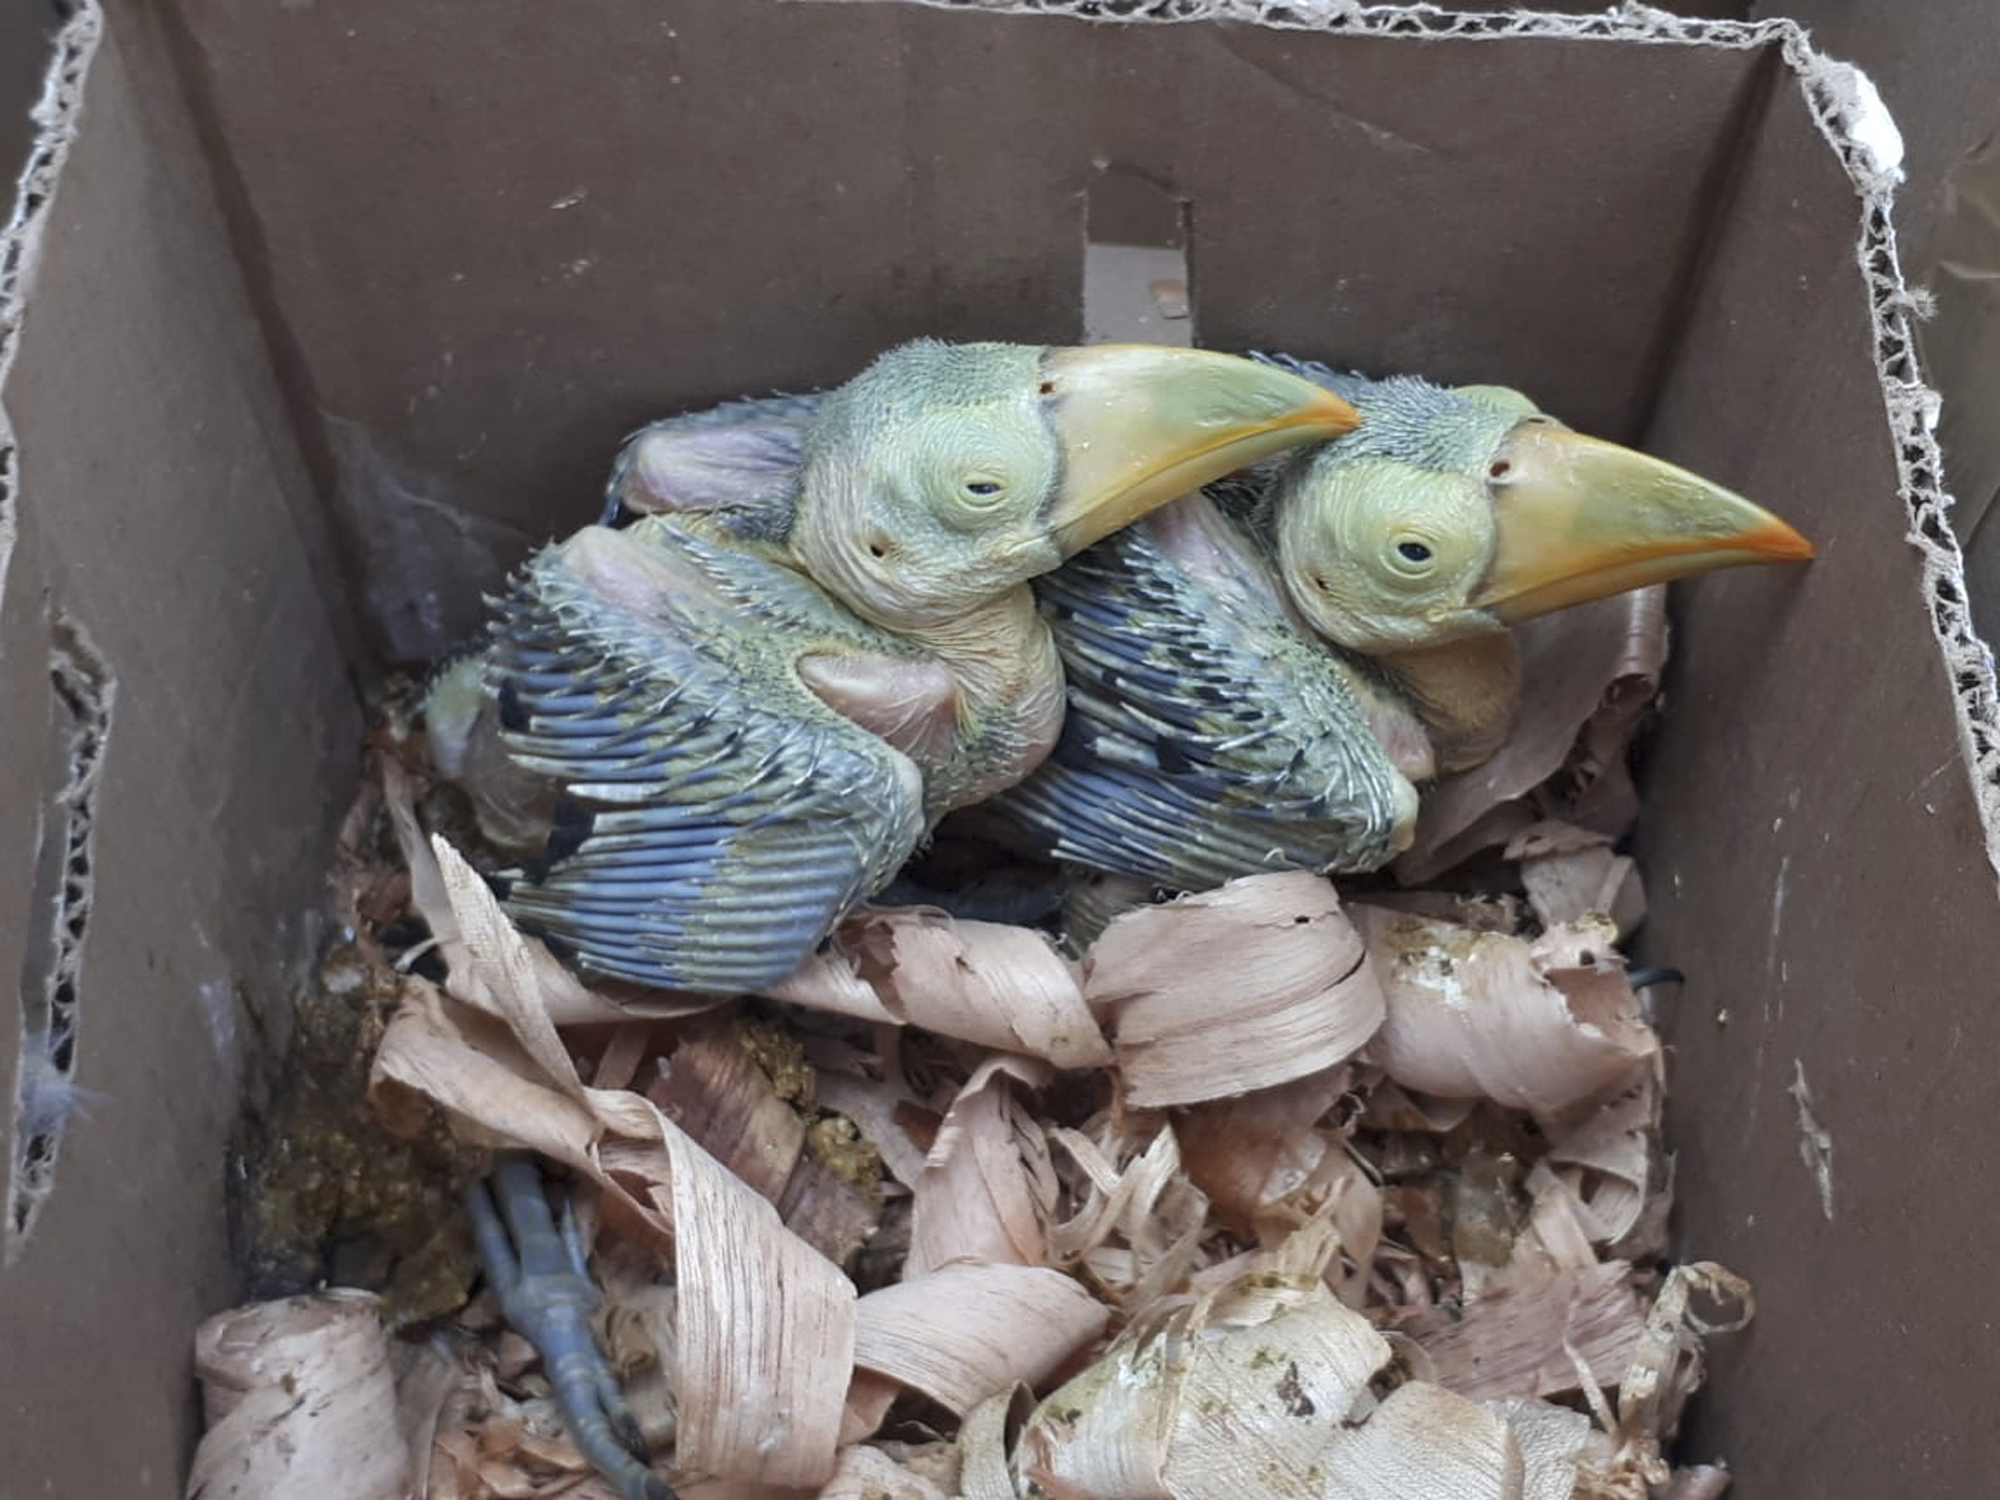 Young hatchlings intercepted by Mexican police authorities 